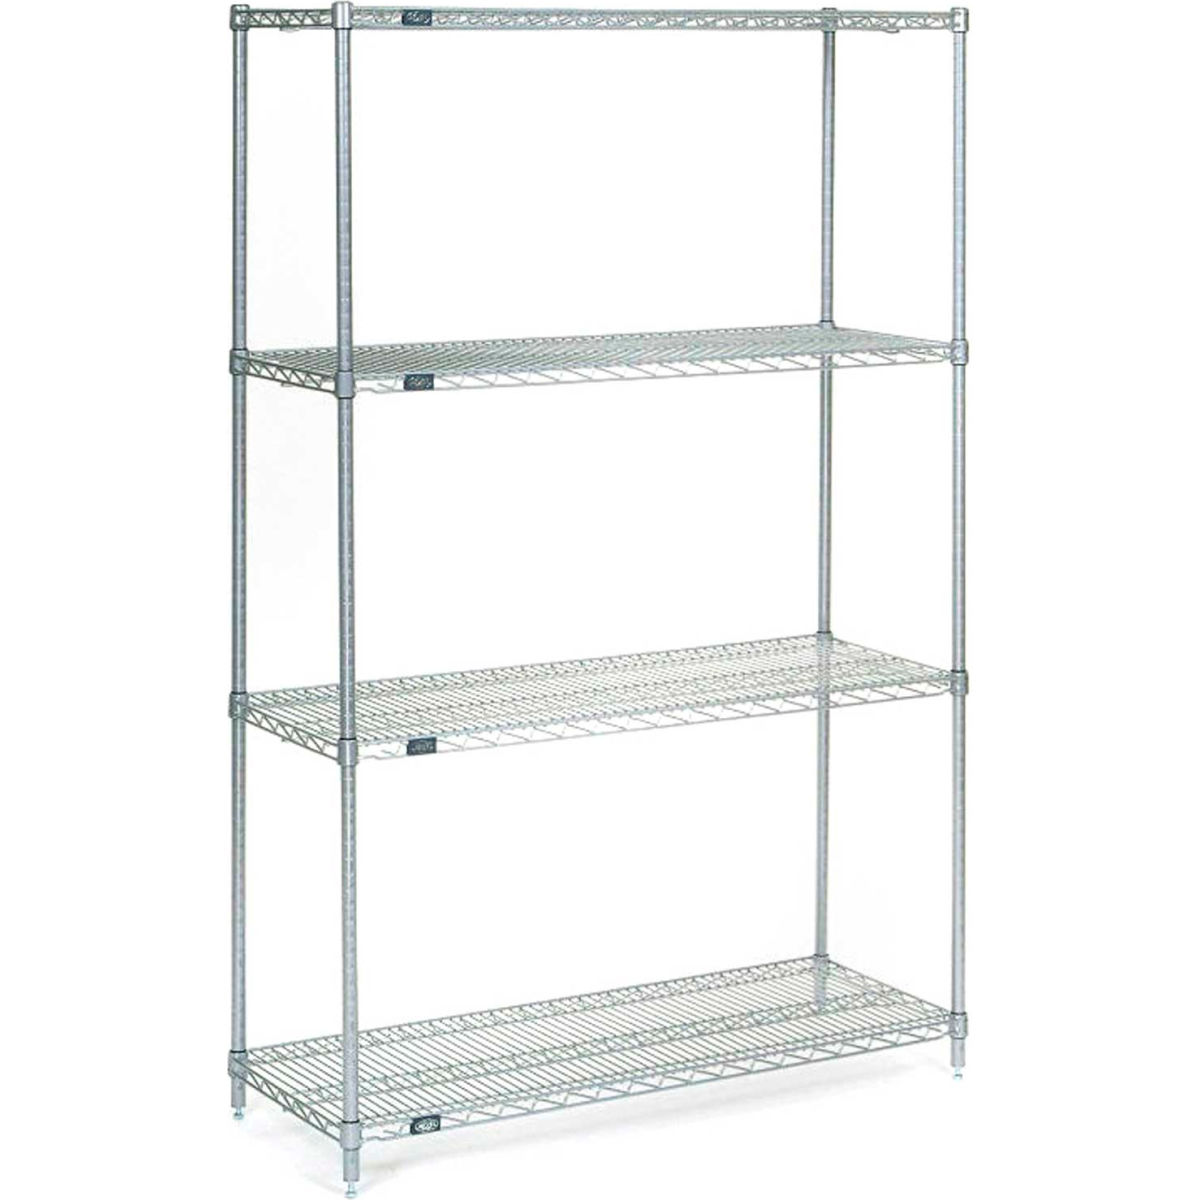 Picture of Global Industrial 14426S5 63 x 42 x 14 in. Nexel Stainless Steel Starter 5 Tier Wire Shelving